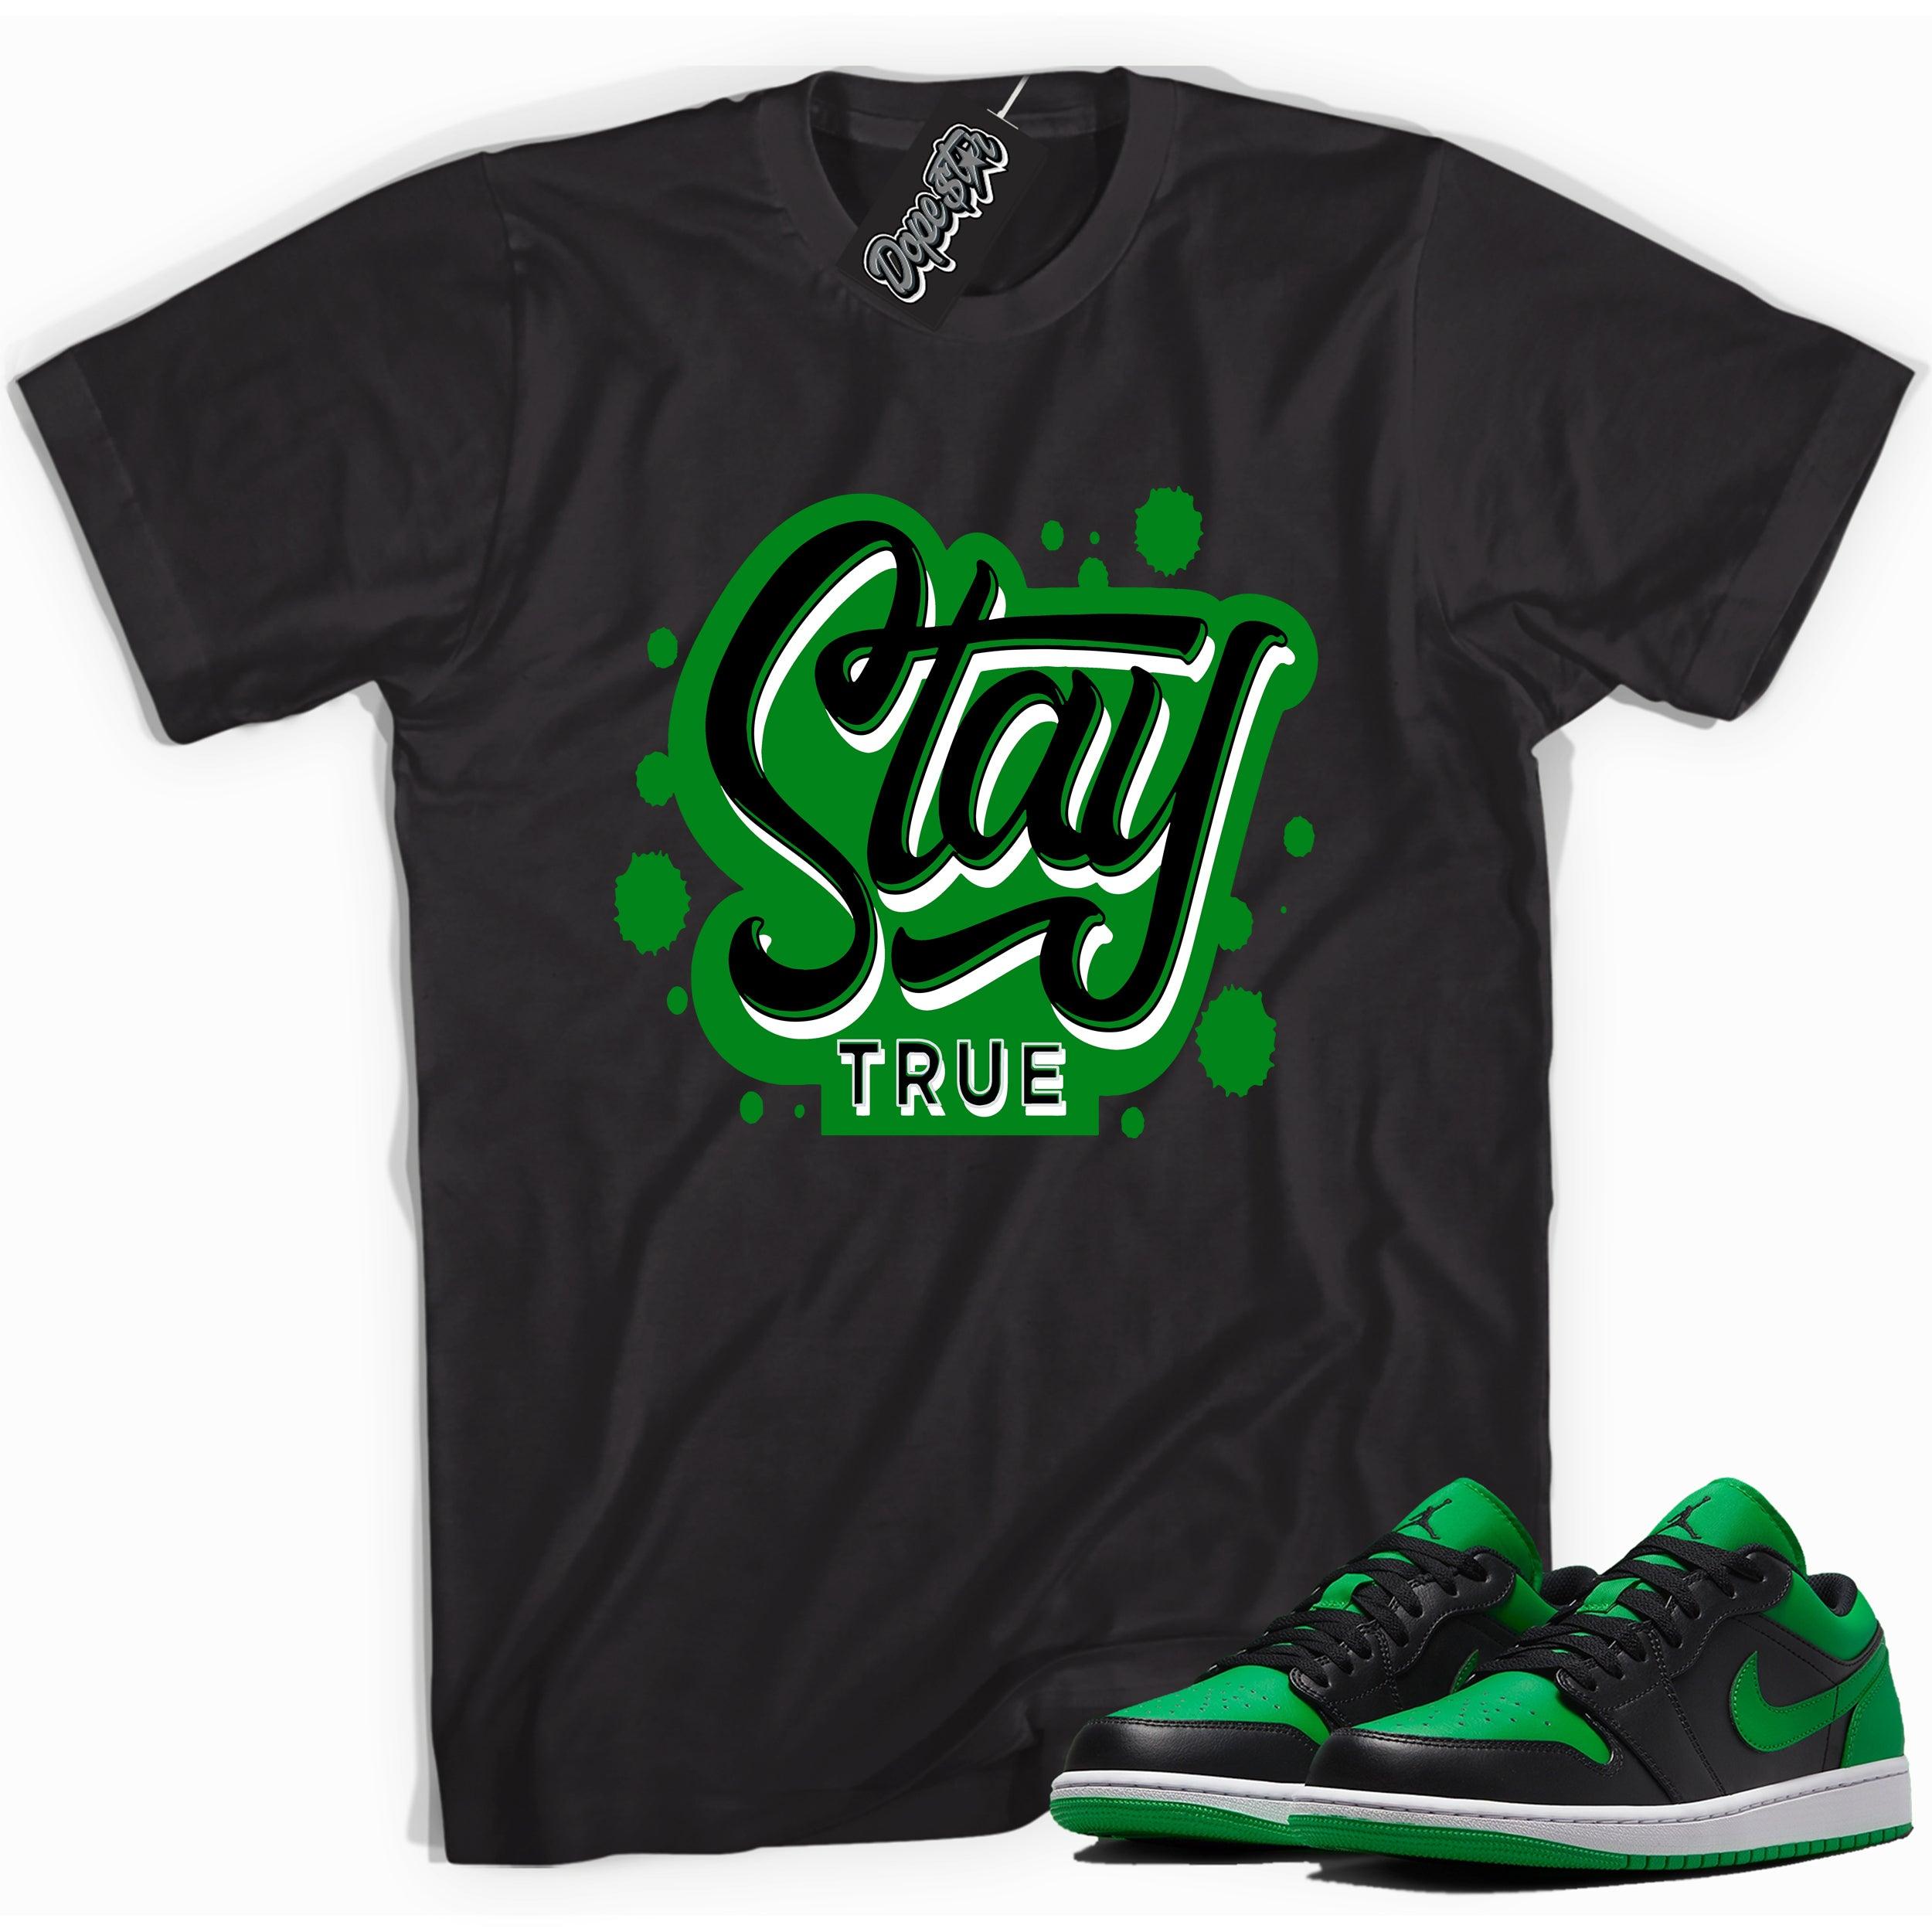 Cool black graphic tee with 'stay true' print, that perfectly matches Air Jordan 1 Low Lucky Green sneakers